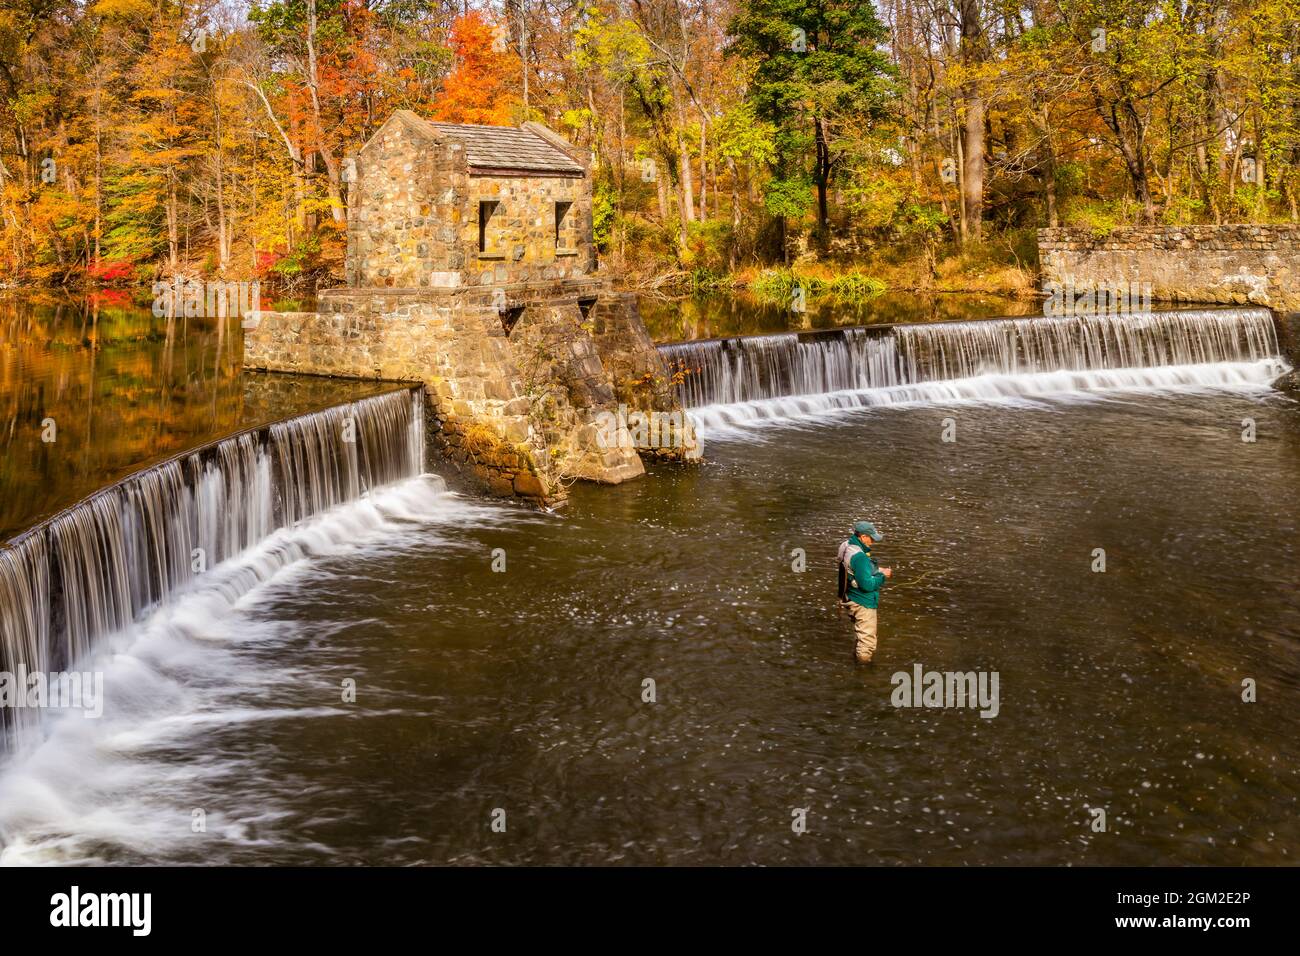 Speedwell Fly Fishing - Man fishing at the Speedwell Dam And Waterfall on the Whippany River surrounded by the warm colors of the fall foliage.   This Stock Photo